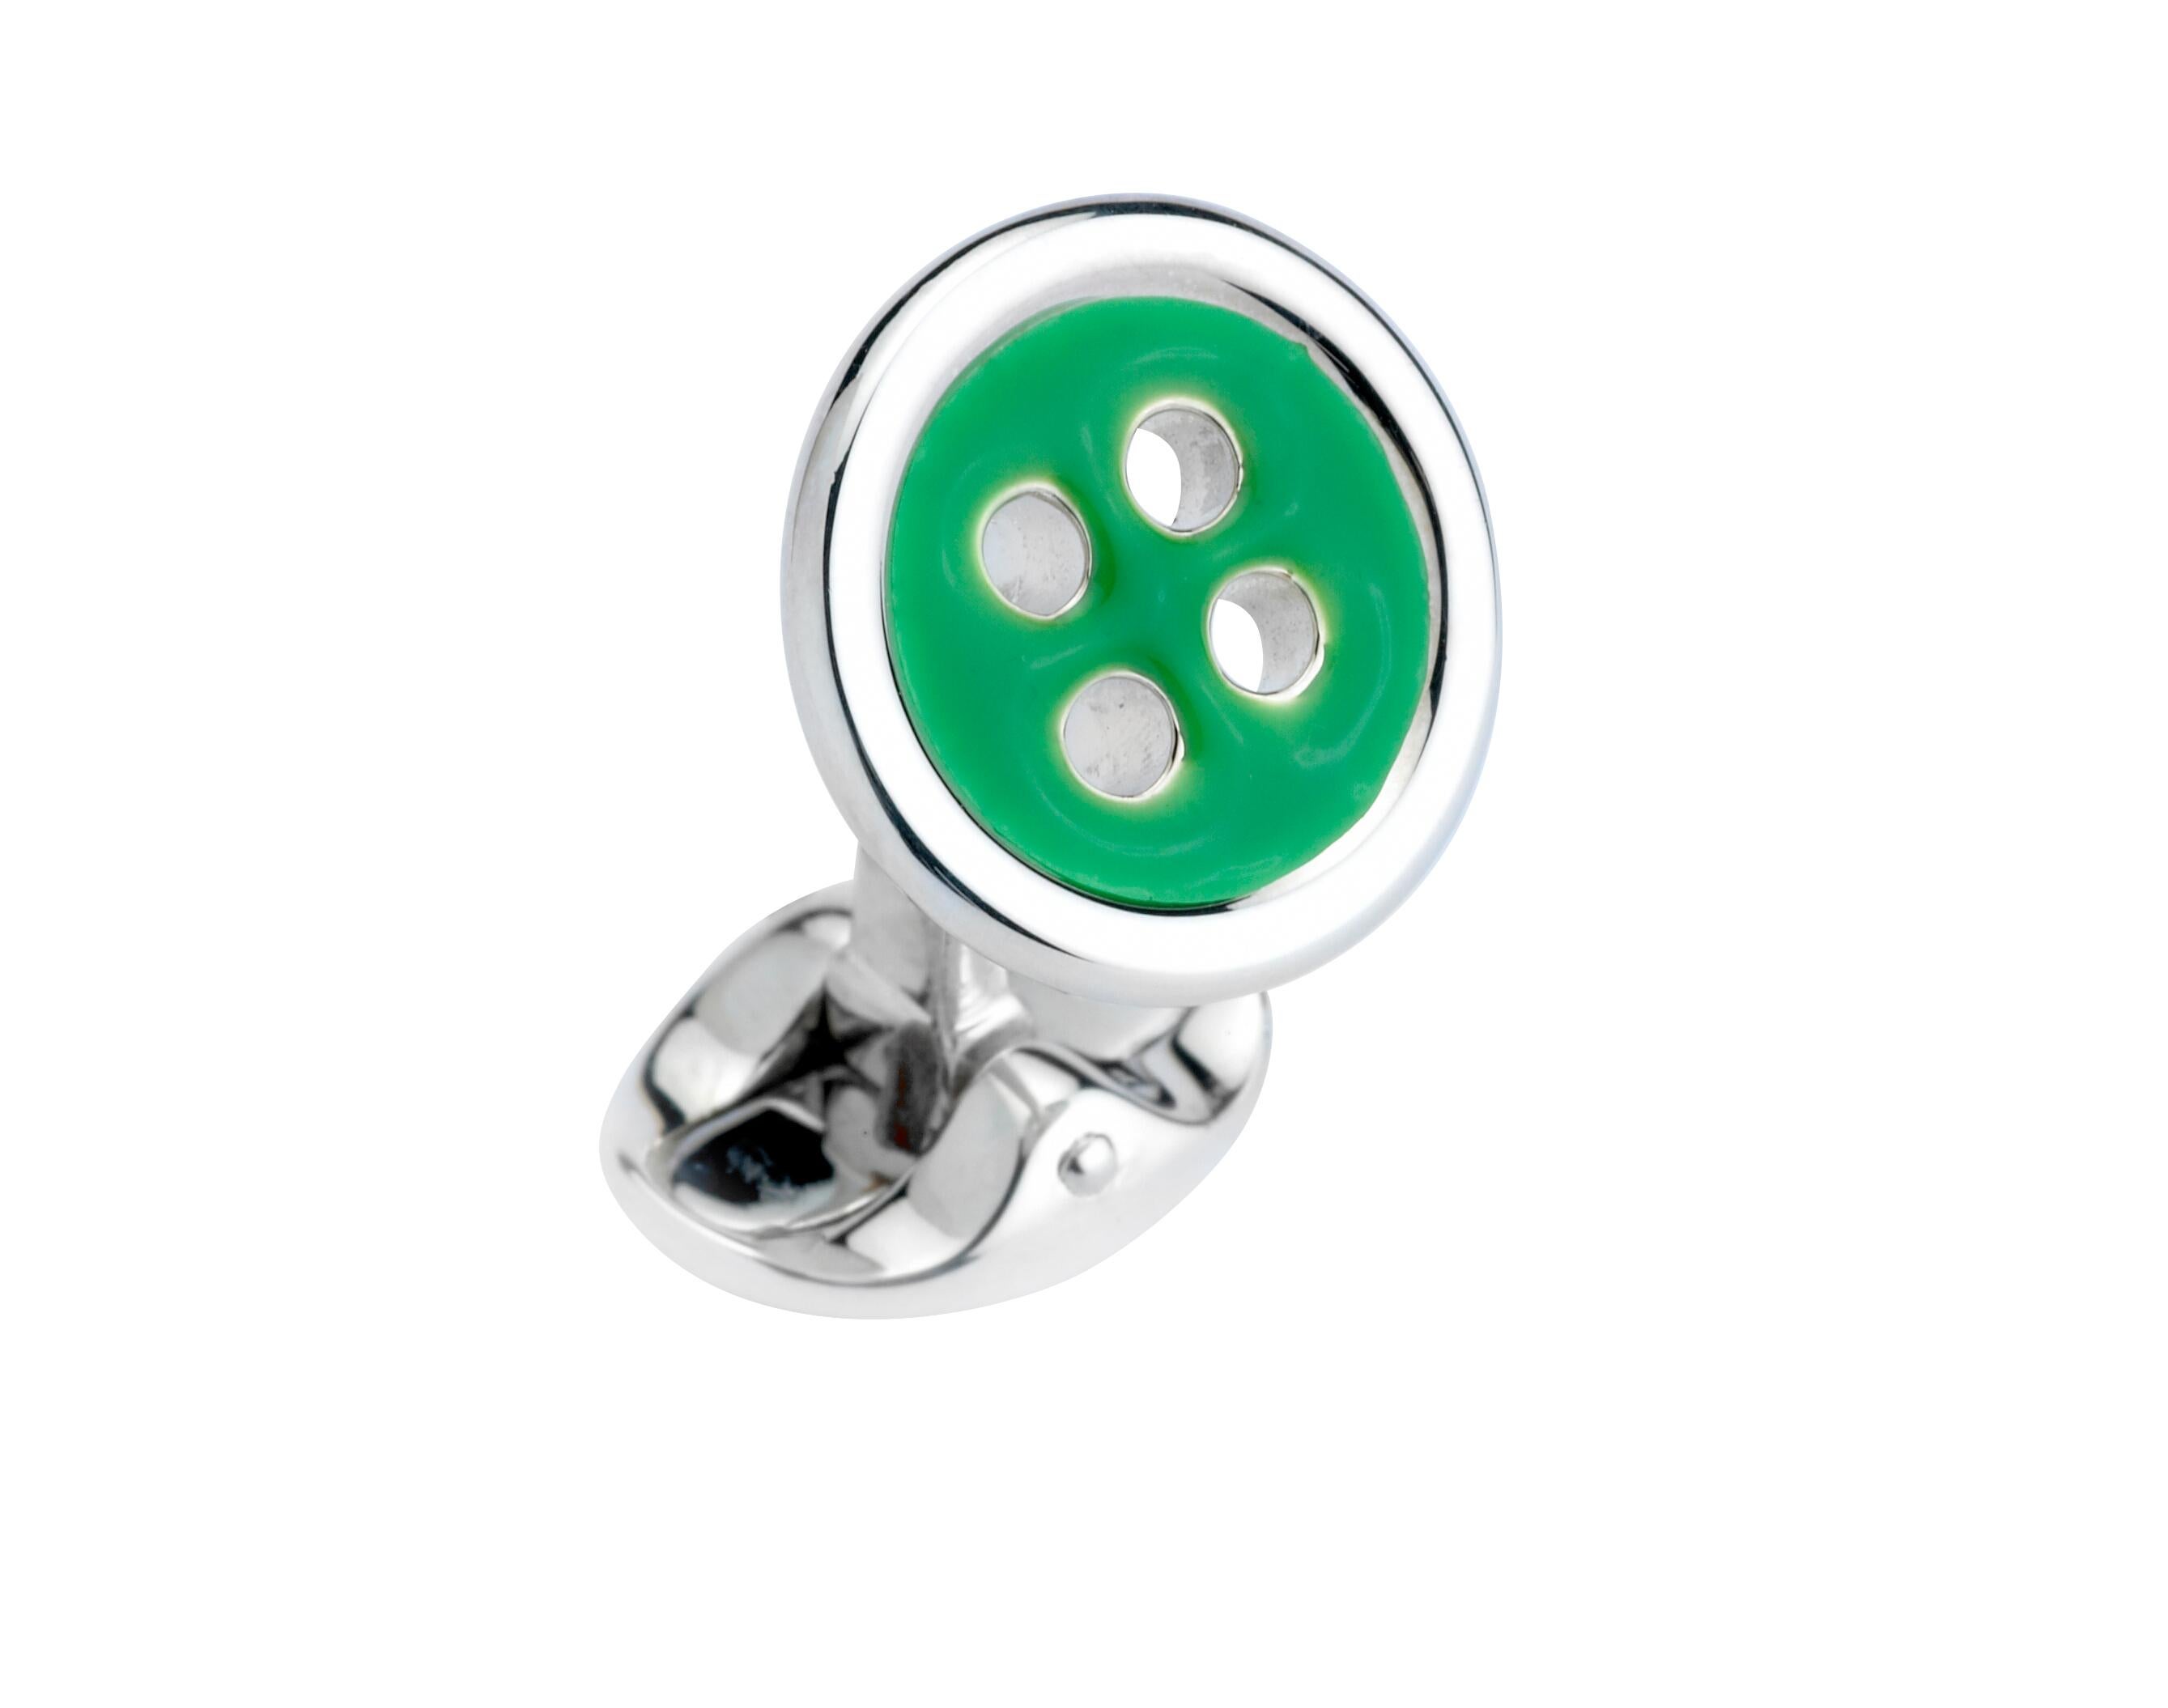 DEAKIN & FRANCIS, Piccadilly Arcade, London

Button shaped cufflinks are a discreet way to accessorise your outfit for all occasions. made from sterling silver.

The beautiful green vitreous enamelling featured on these cufflinks will subtly